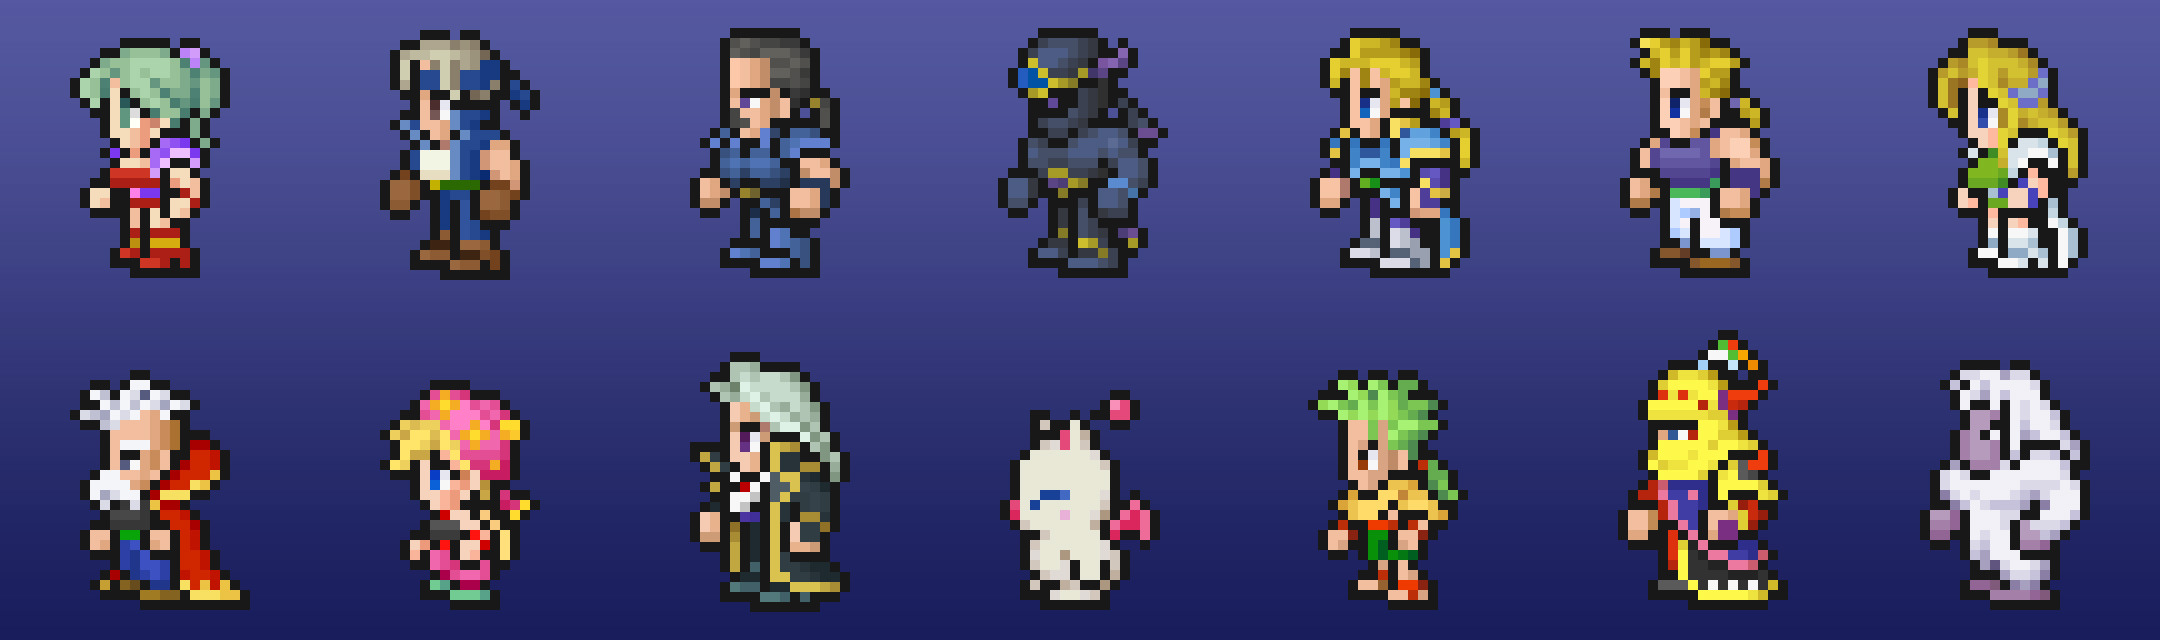 Final Fantasy Vi Pixel Remaster Main Character Differences In Version